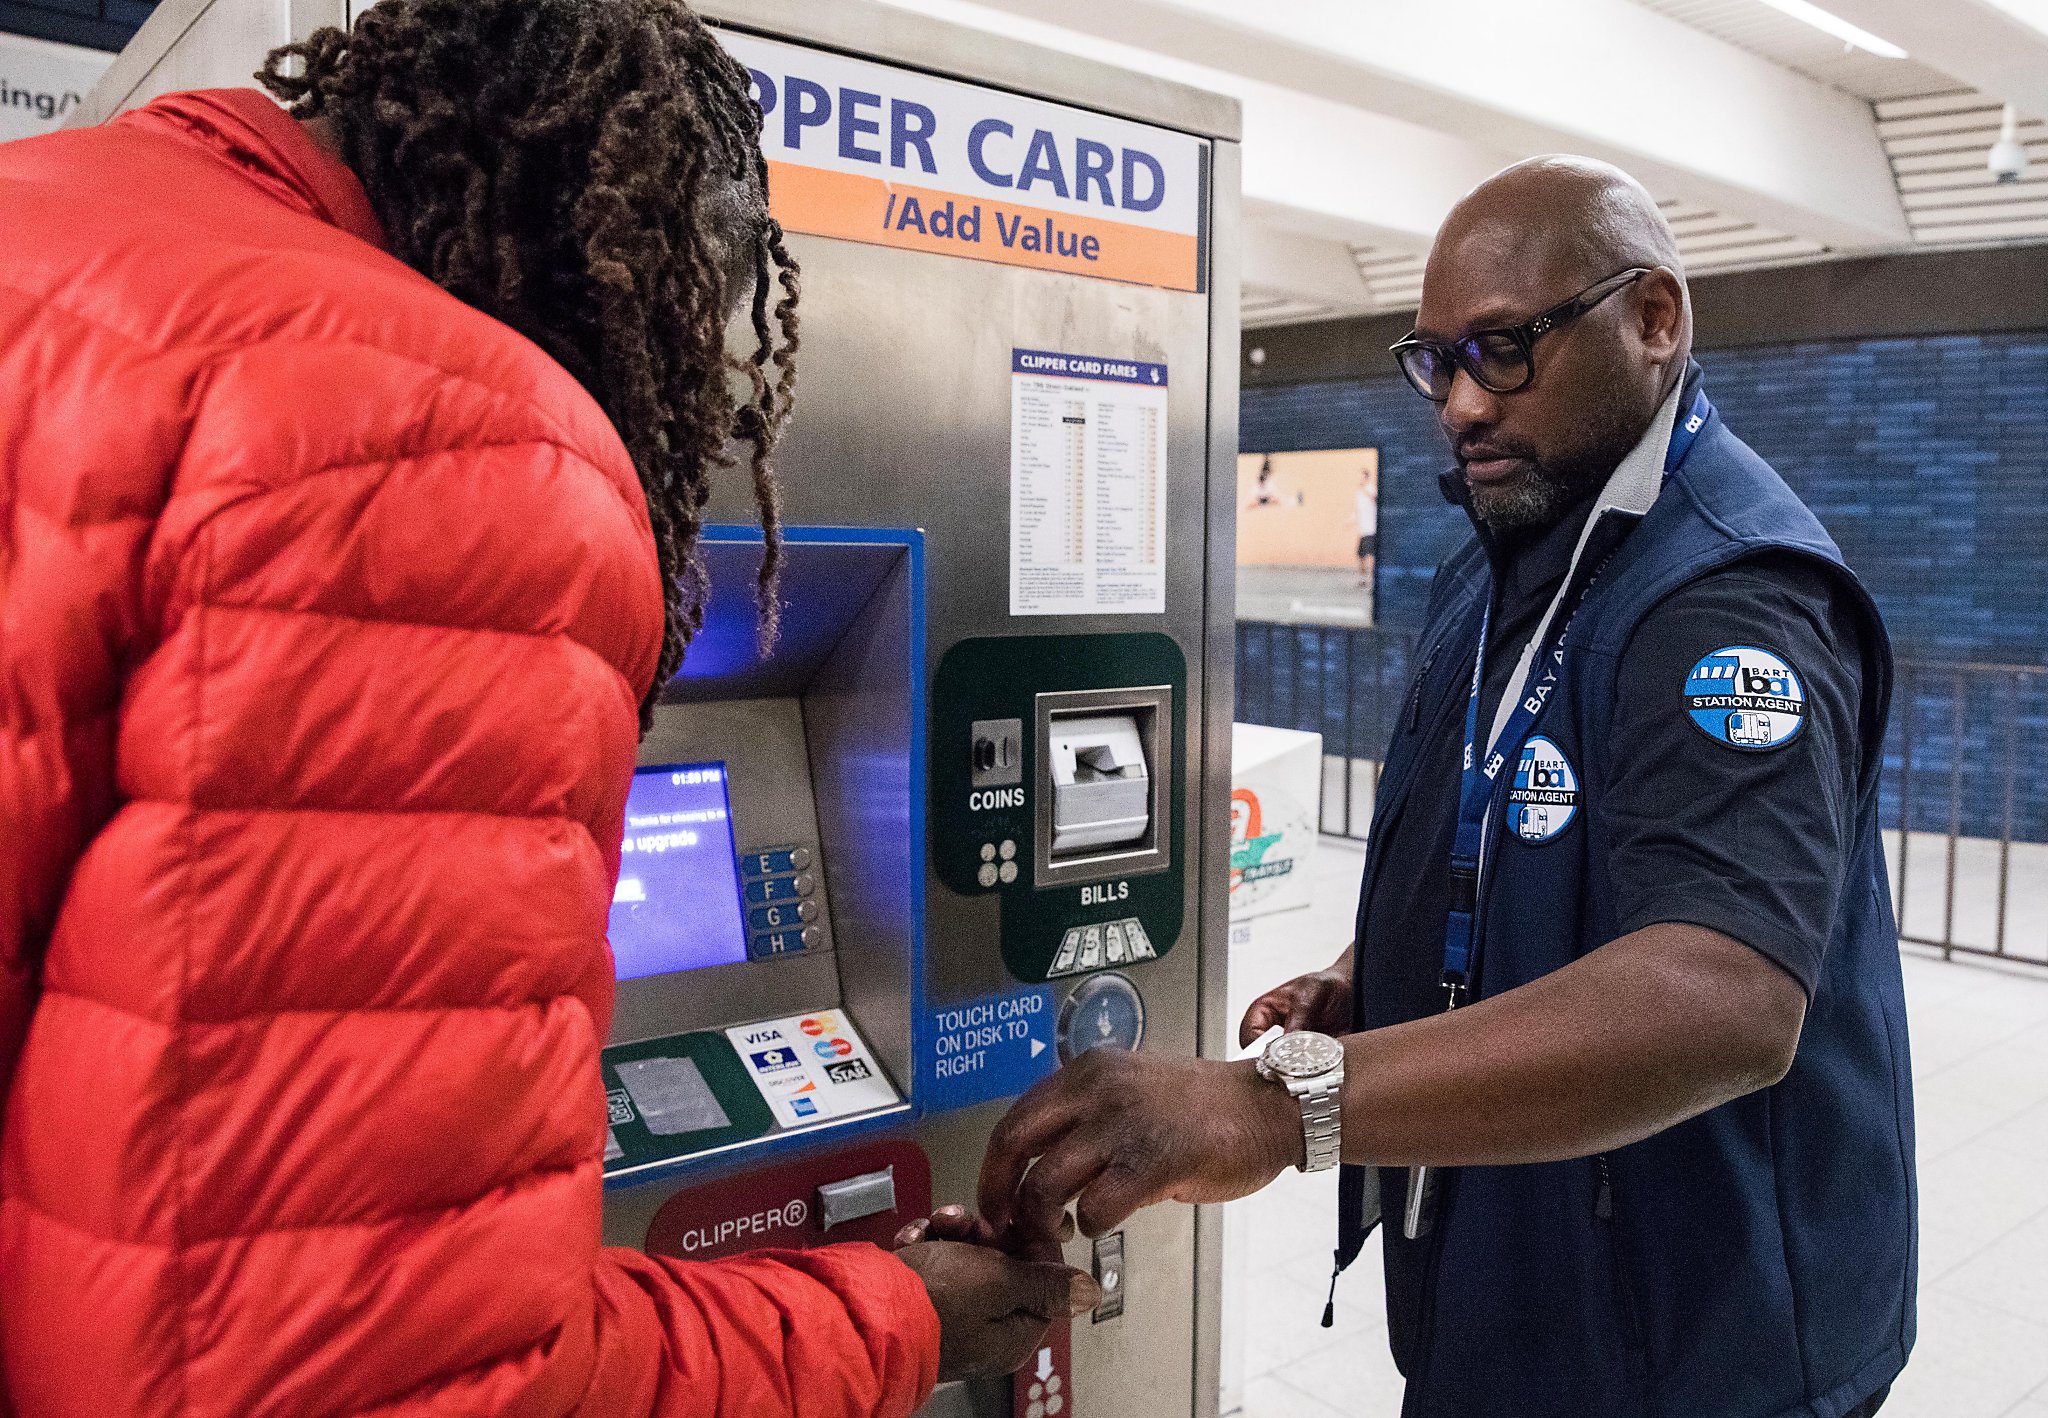 add paper bart ticket to clipper card